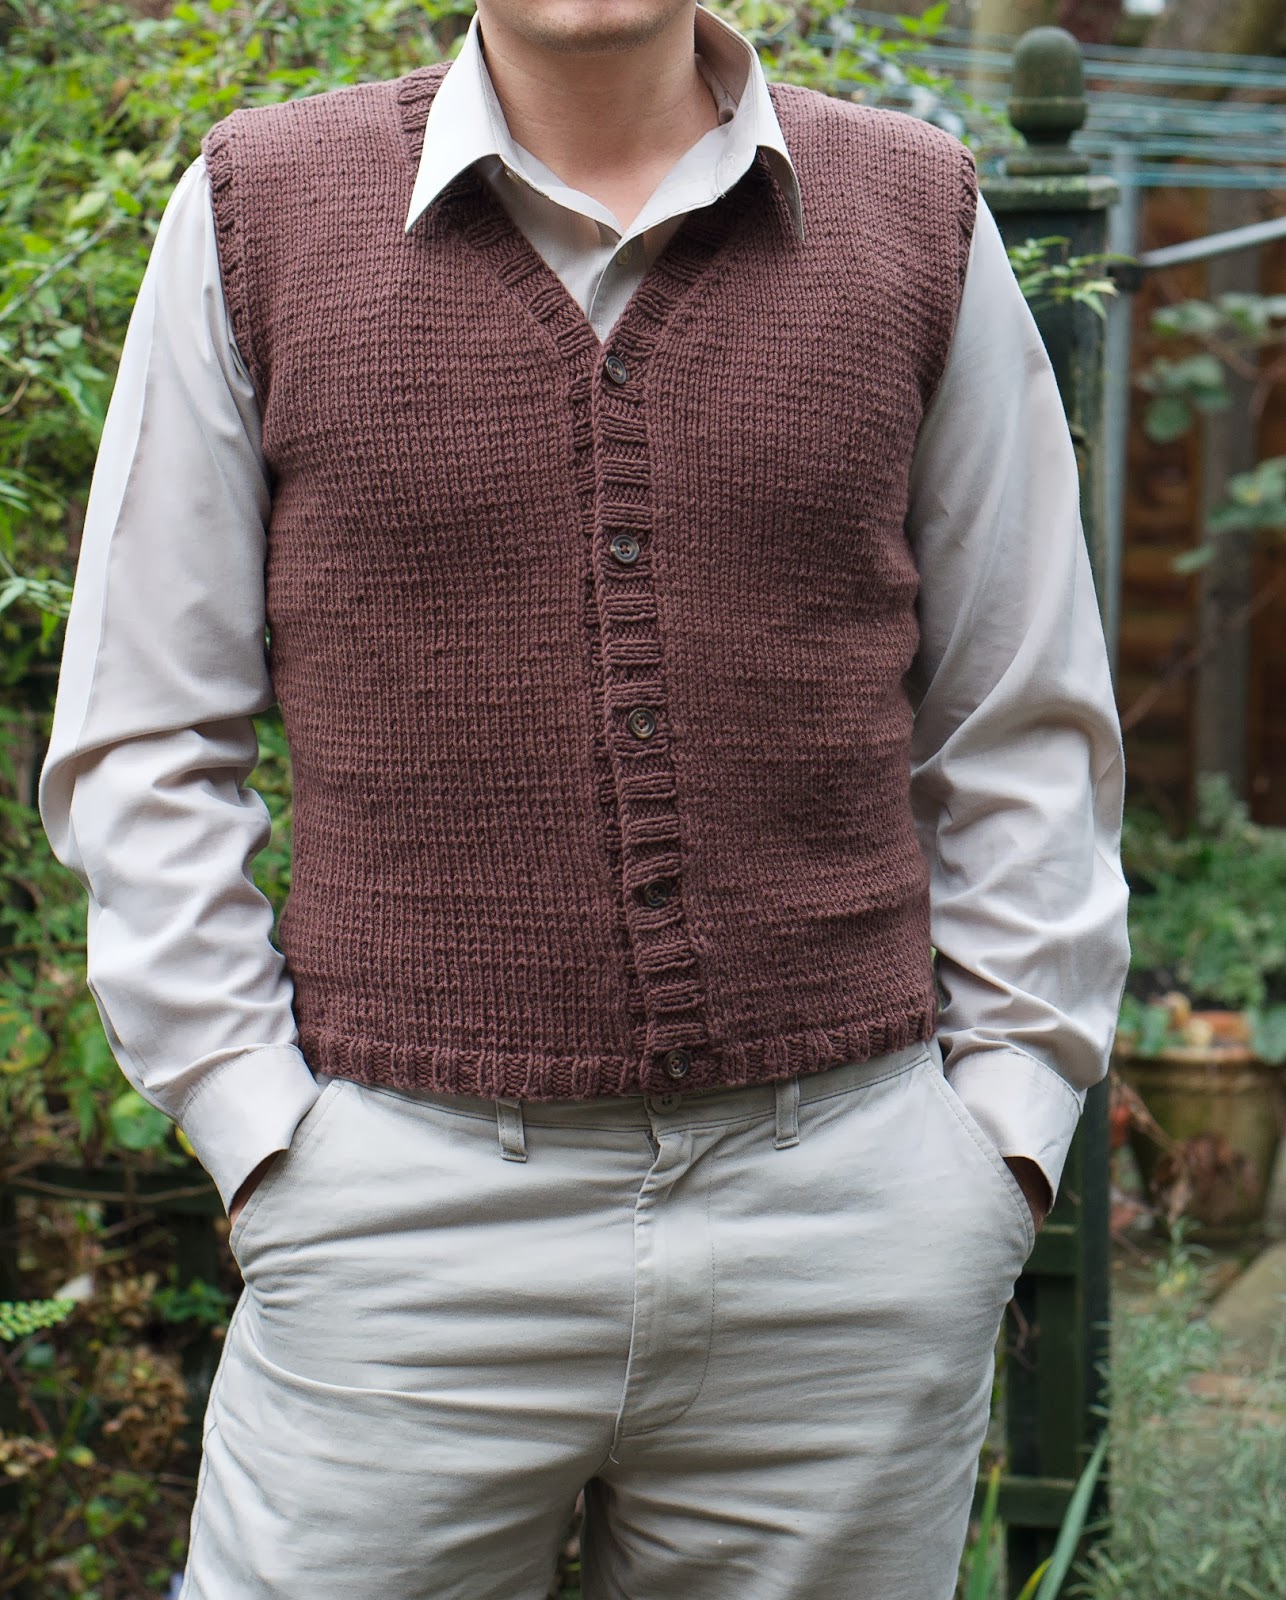 Ela Sews And Doesn't Sleep: What a lucky guy: Knitted men's vest